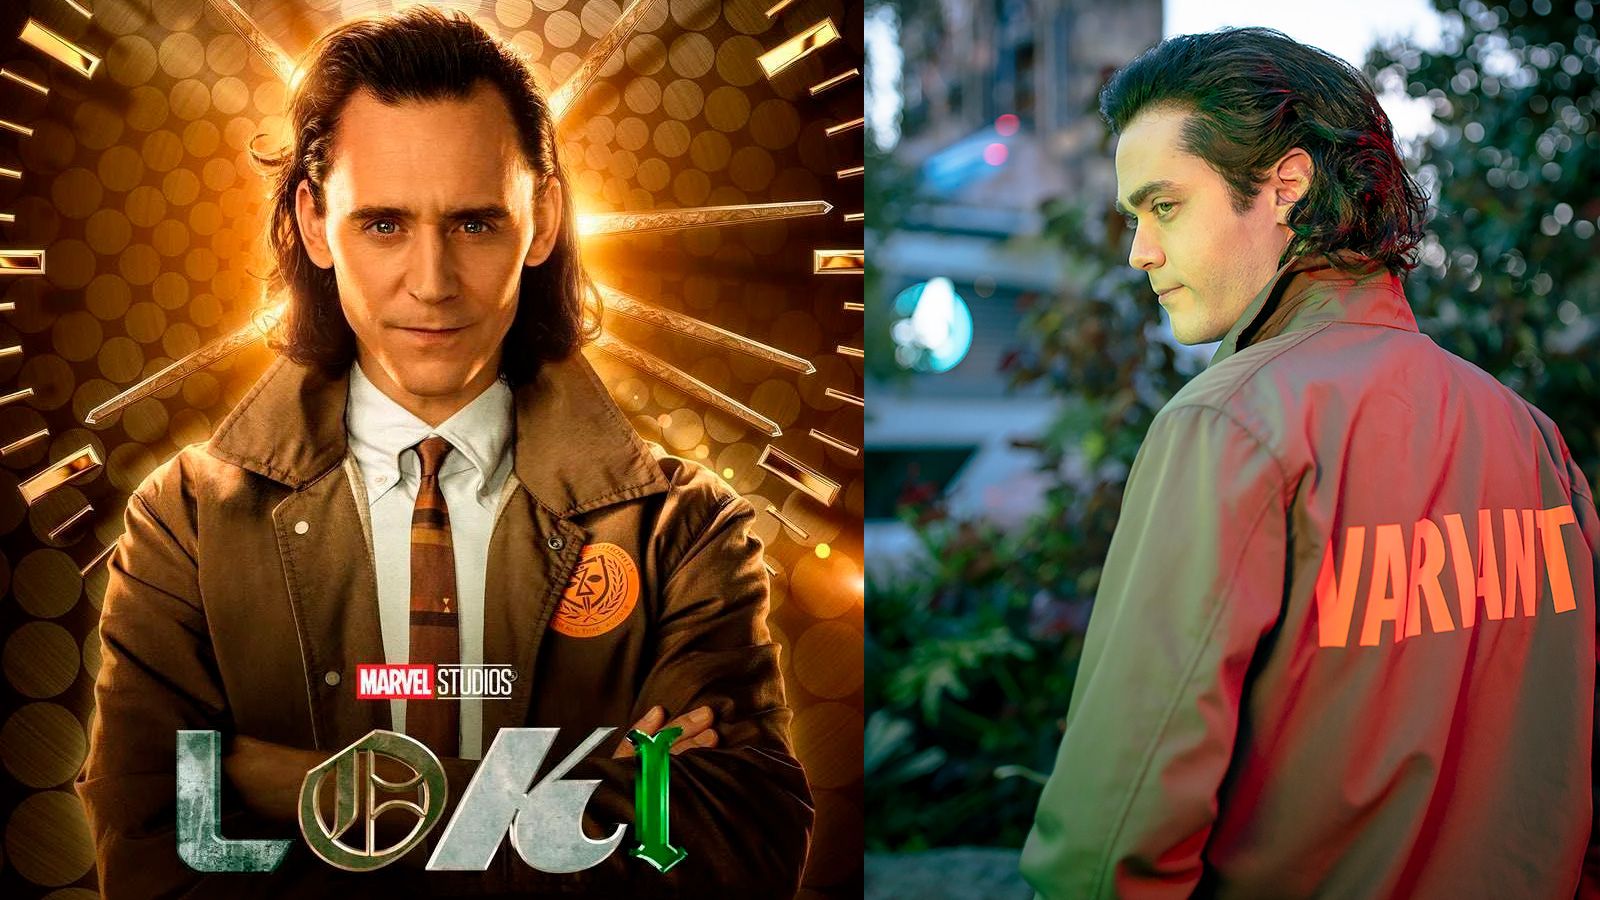 LOKI is burdened with a glorious wardrobe, revealing yet another look for AVENGERS CAMPUS